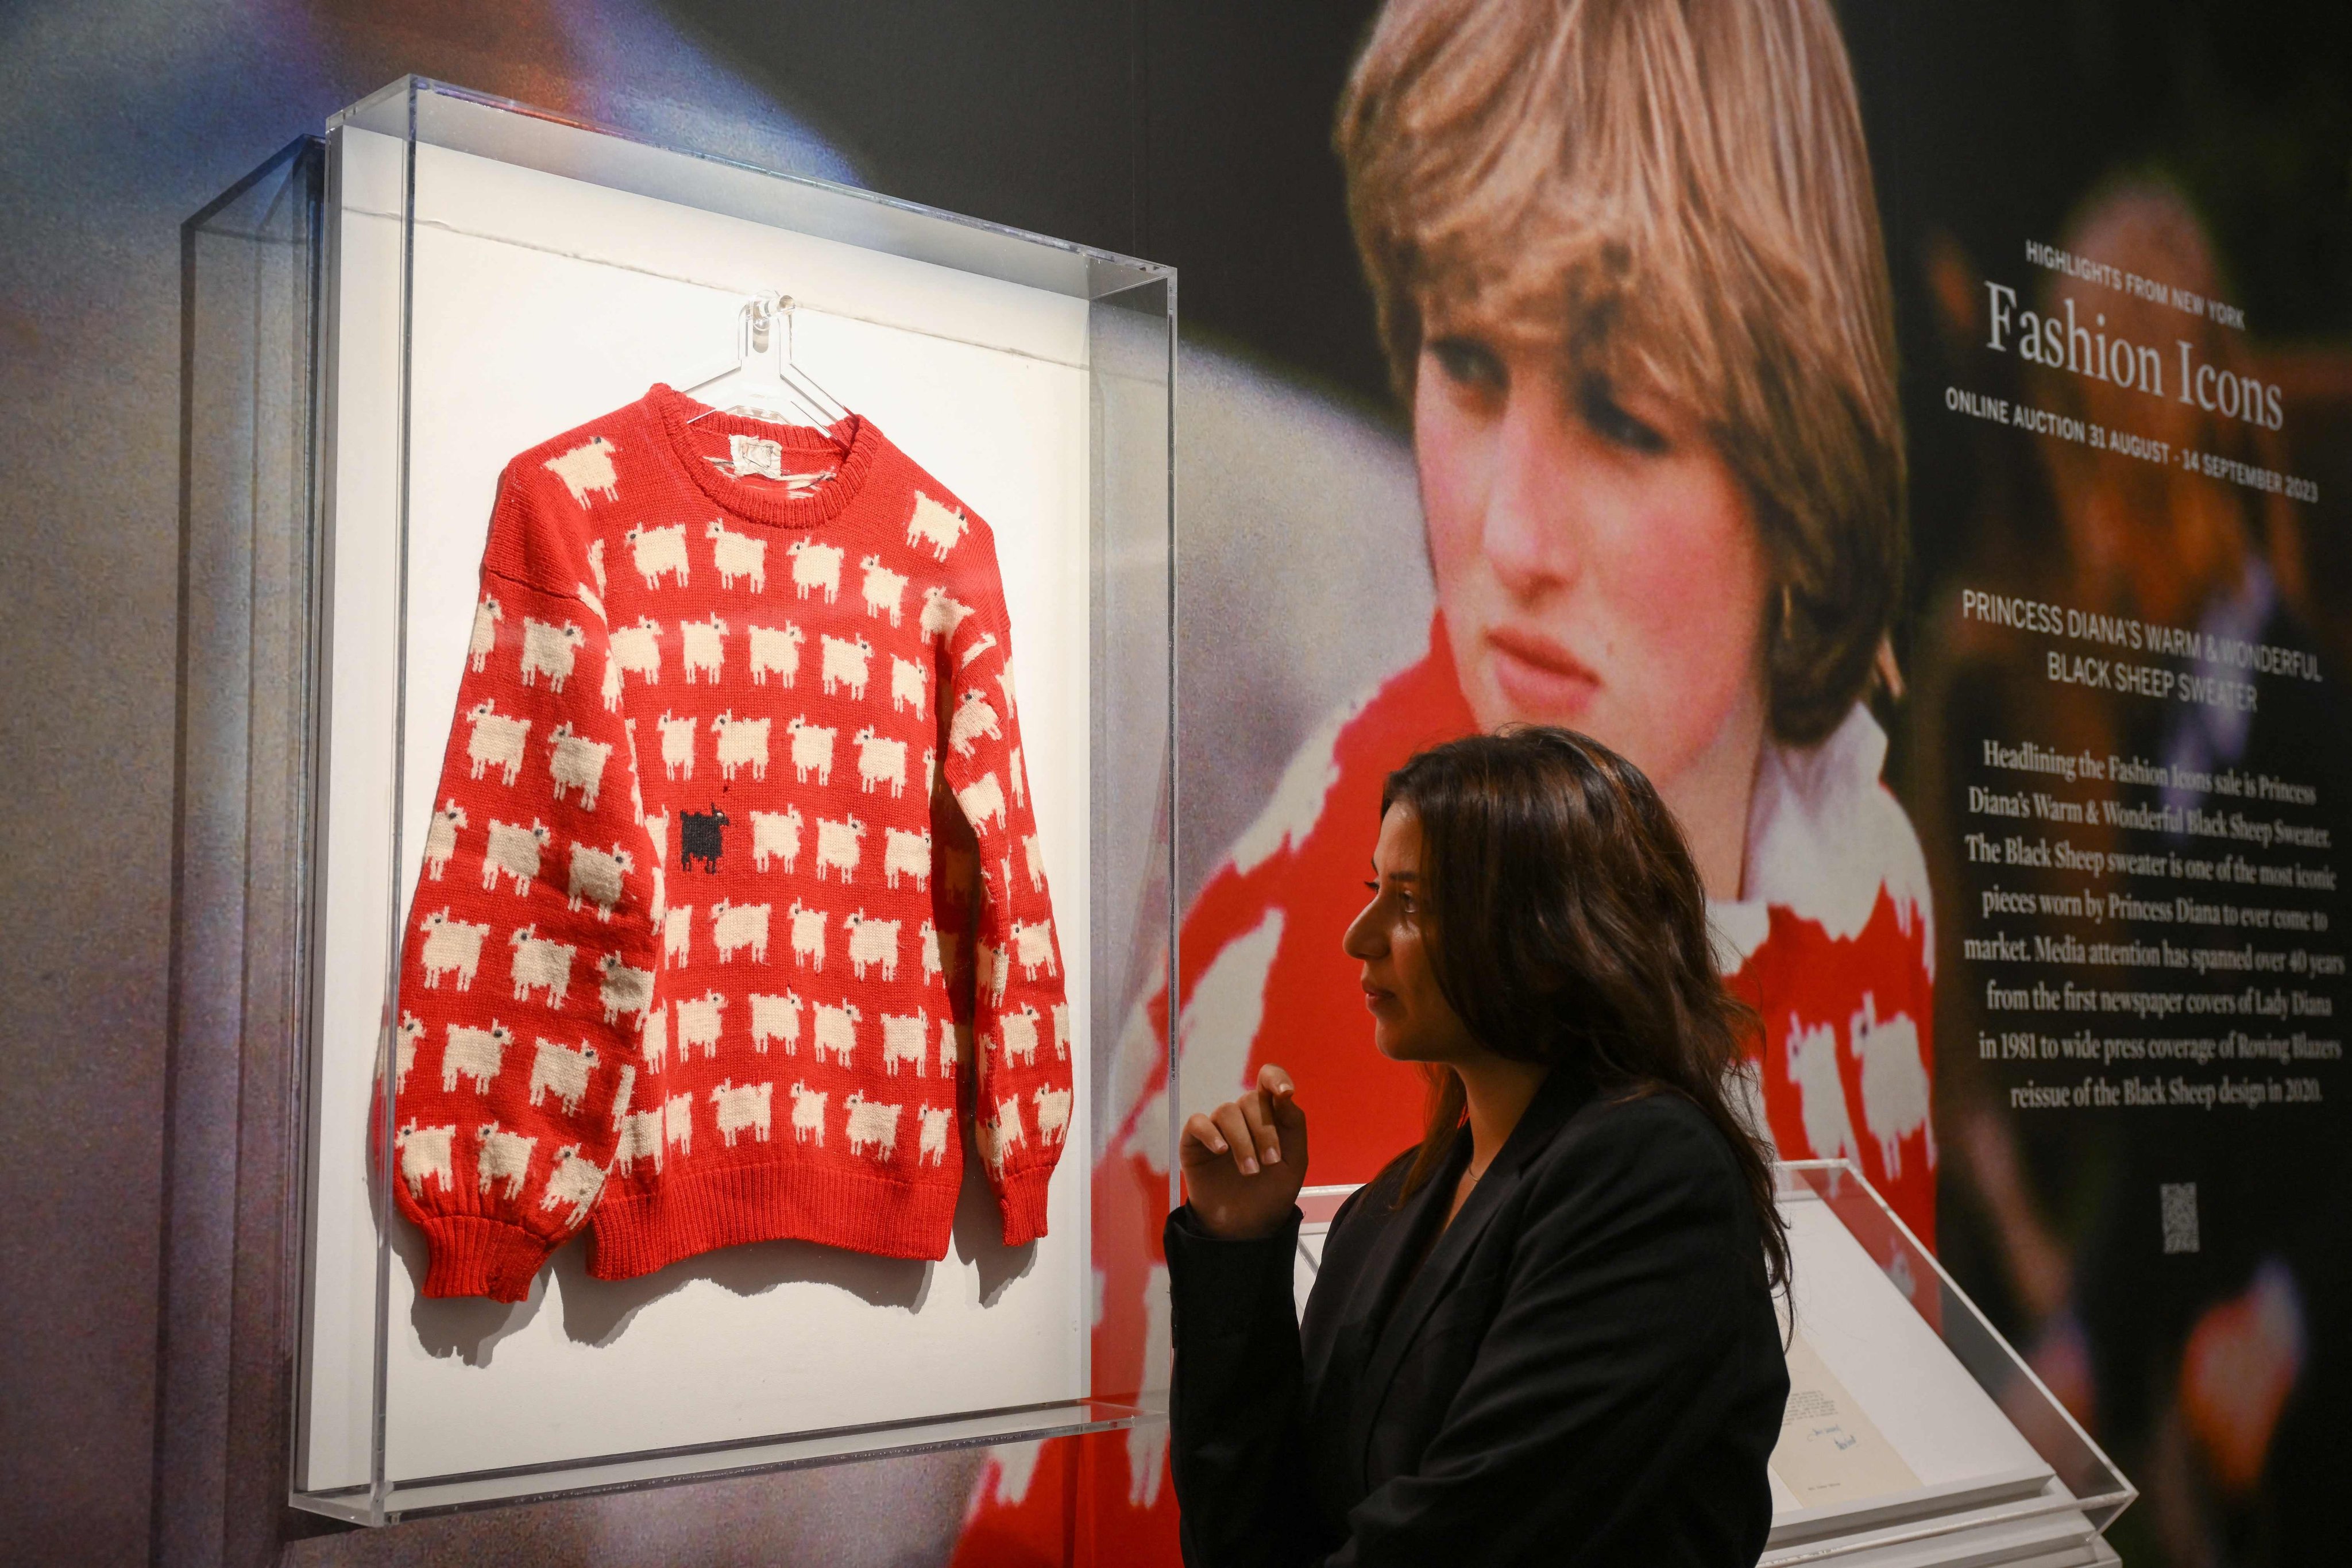 Princess Diana’s black sheep jumper on display at Sotheby’s auction house on July 17 ahead of its sale. Photo: AFP